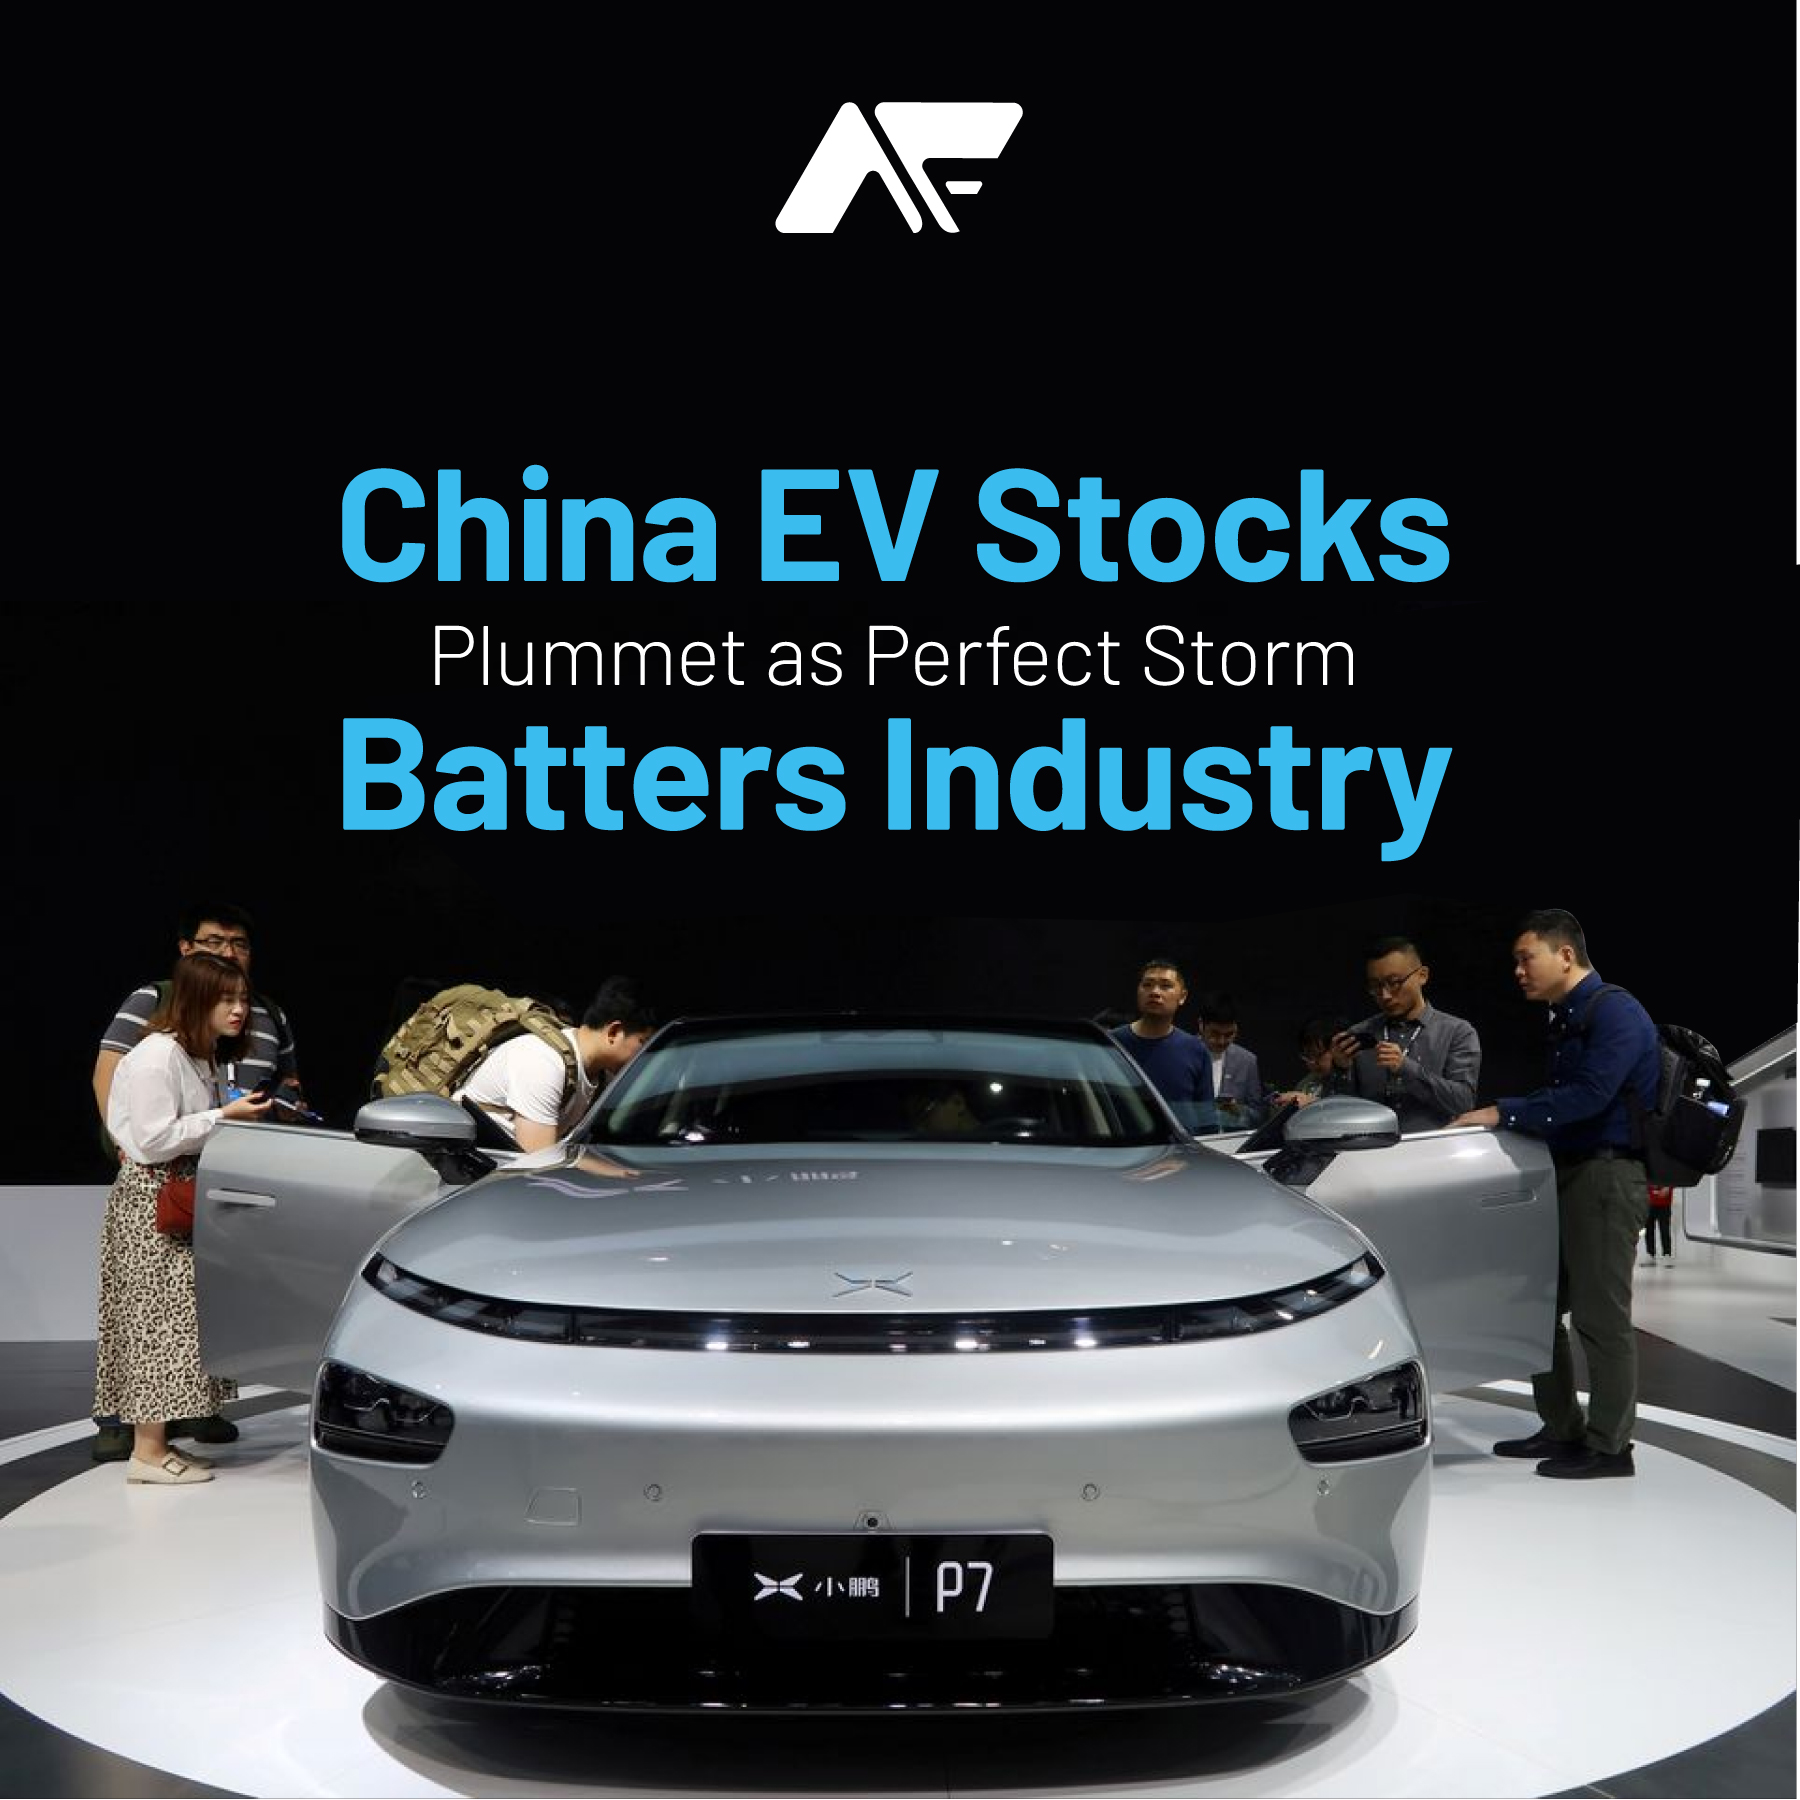 China EV Stocks Are Being Hammered by a Perfect Storm